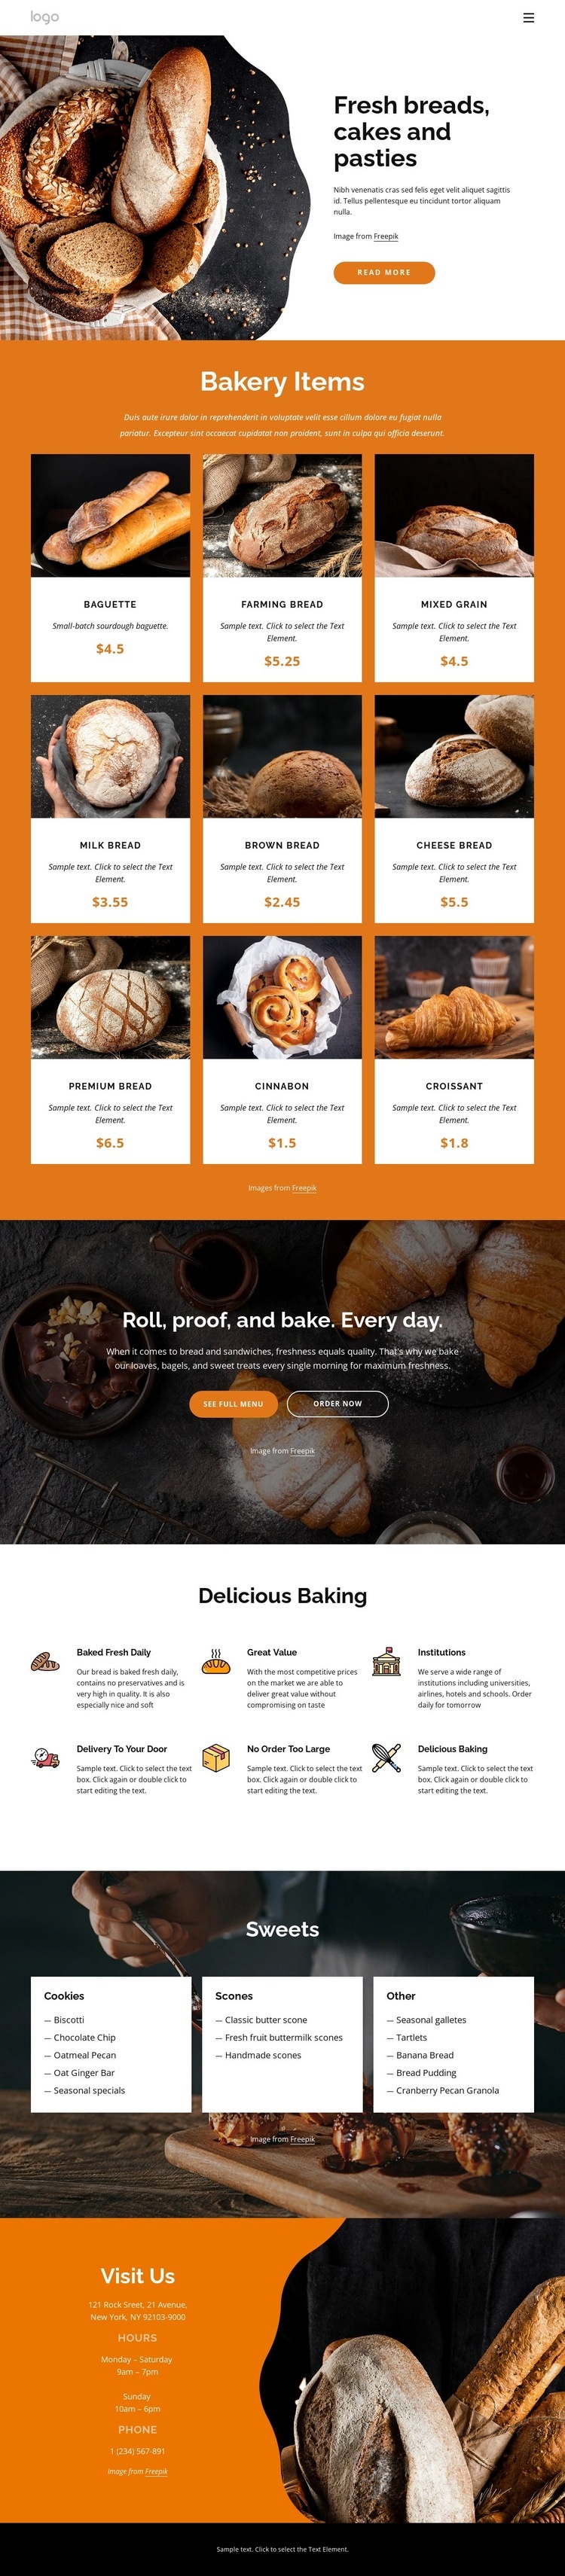 Fresh breads and cakes Web Page Design